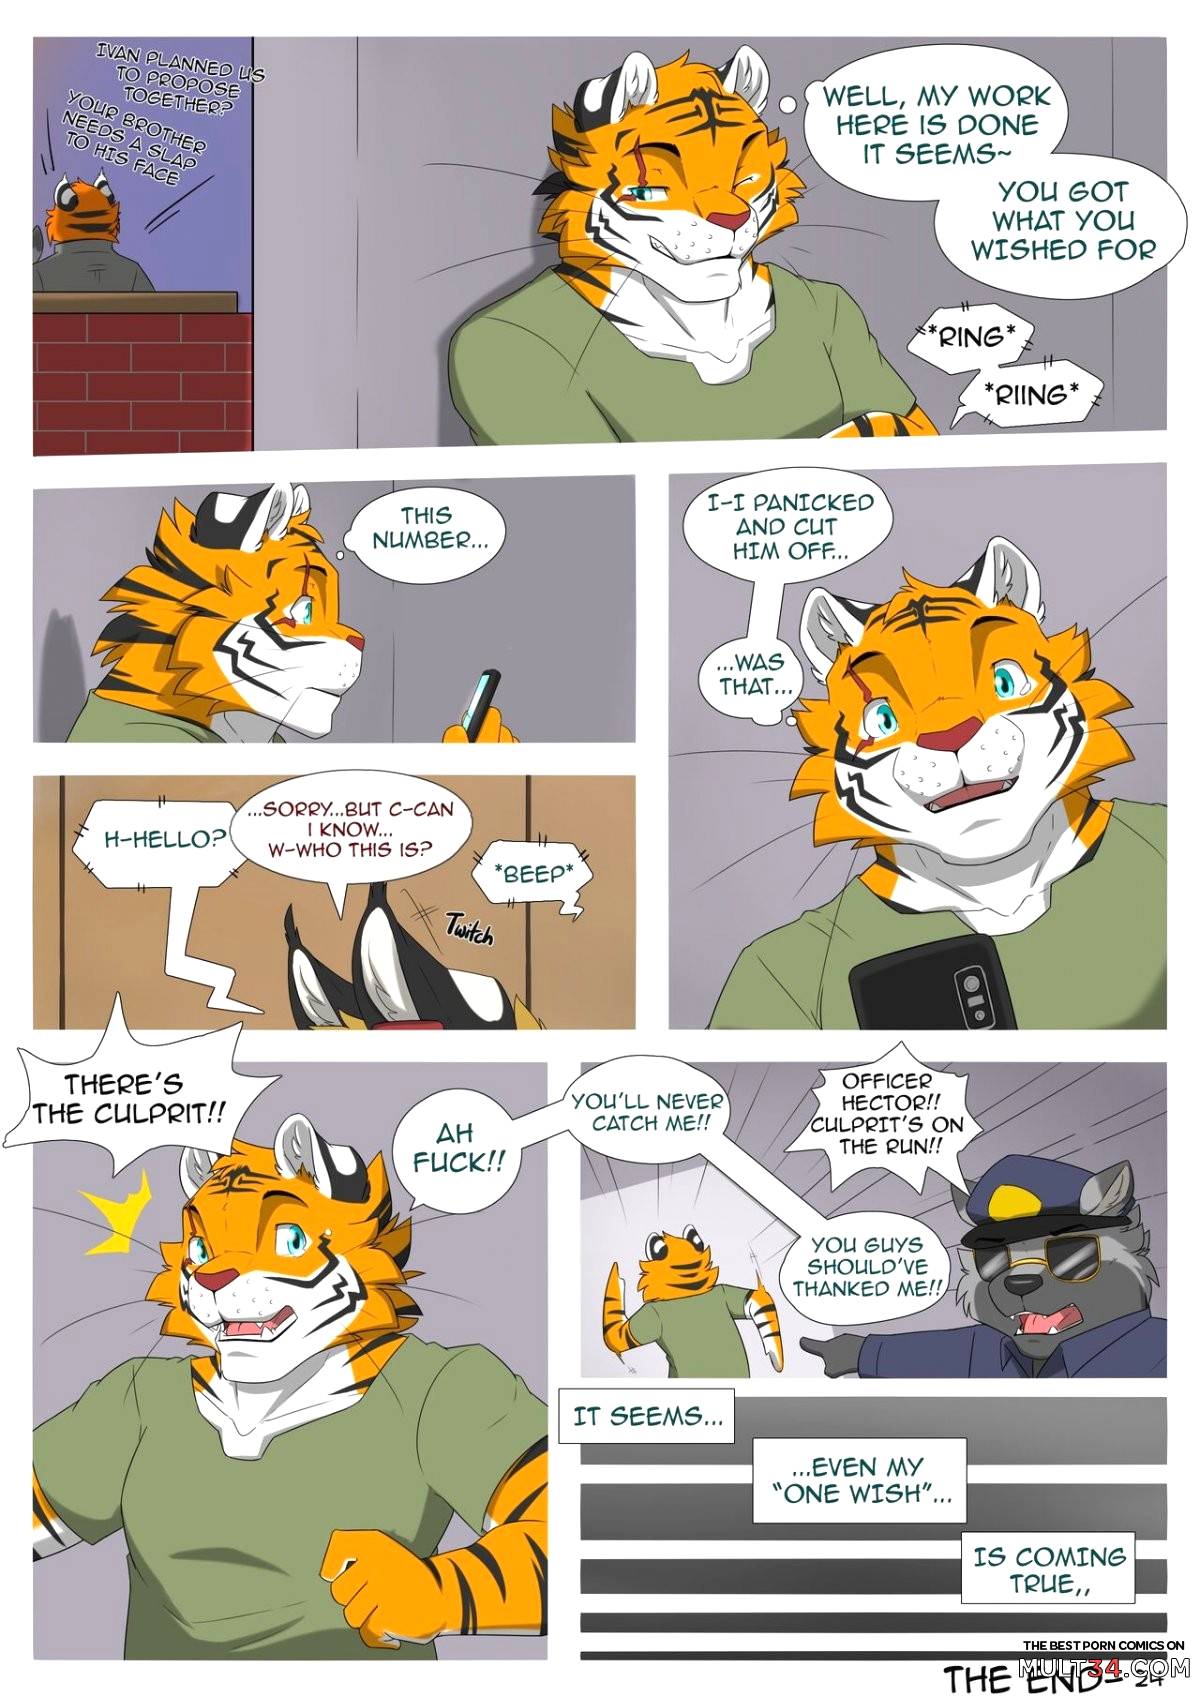 One Wish page 25